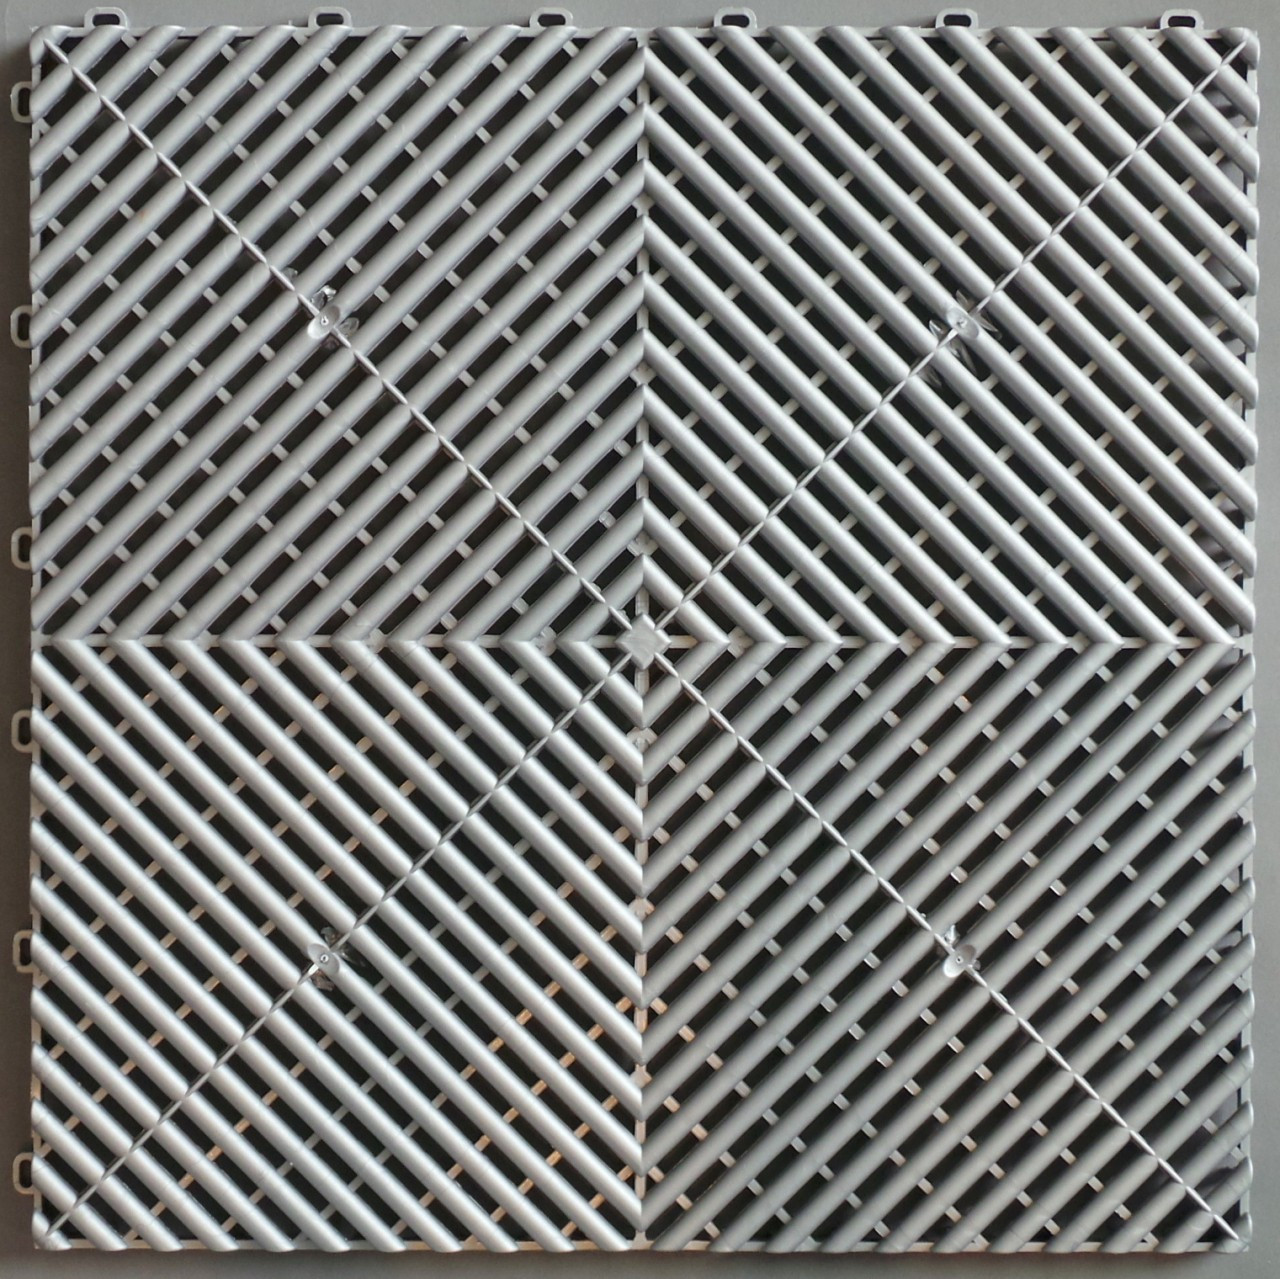 Ribtrax Pro STANDARD "Pearl Grey" Tiles (6-Pack) Tile Size: 15 3/4" x 15 3/4" (1 Tile = 1.72 sq ft)